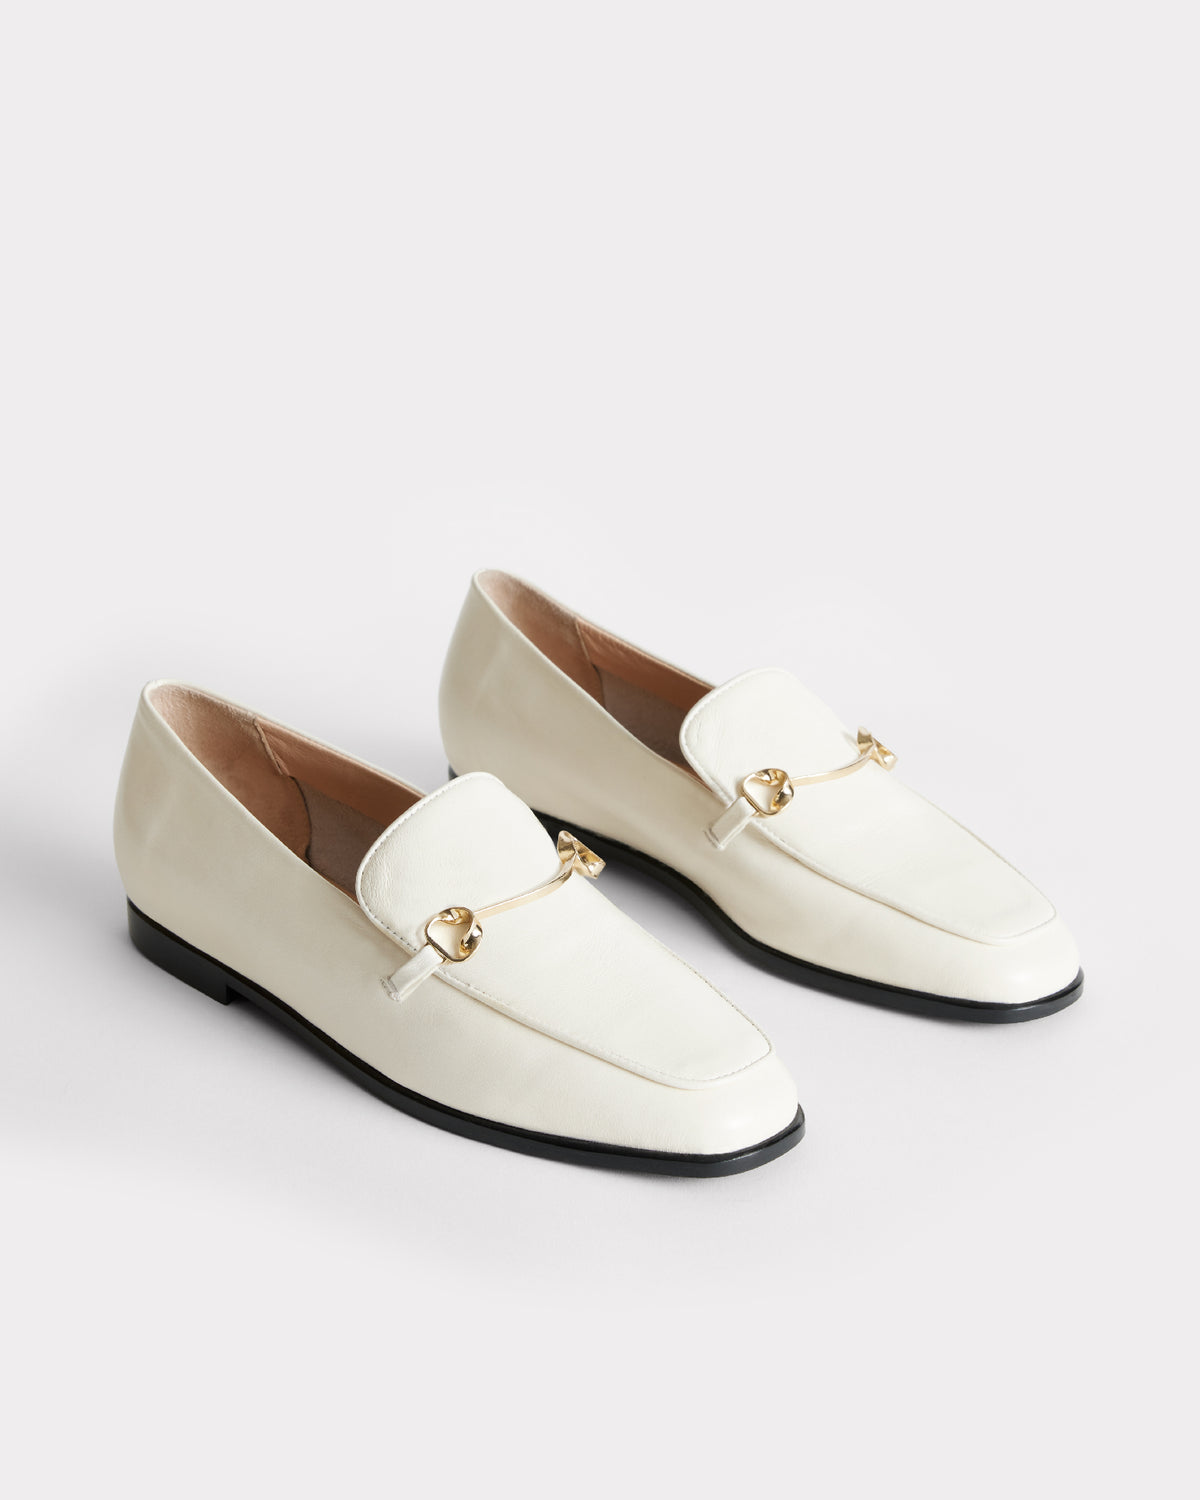 classic white leather moccasin with gold hardware